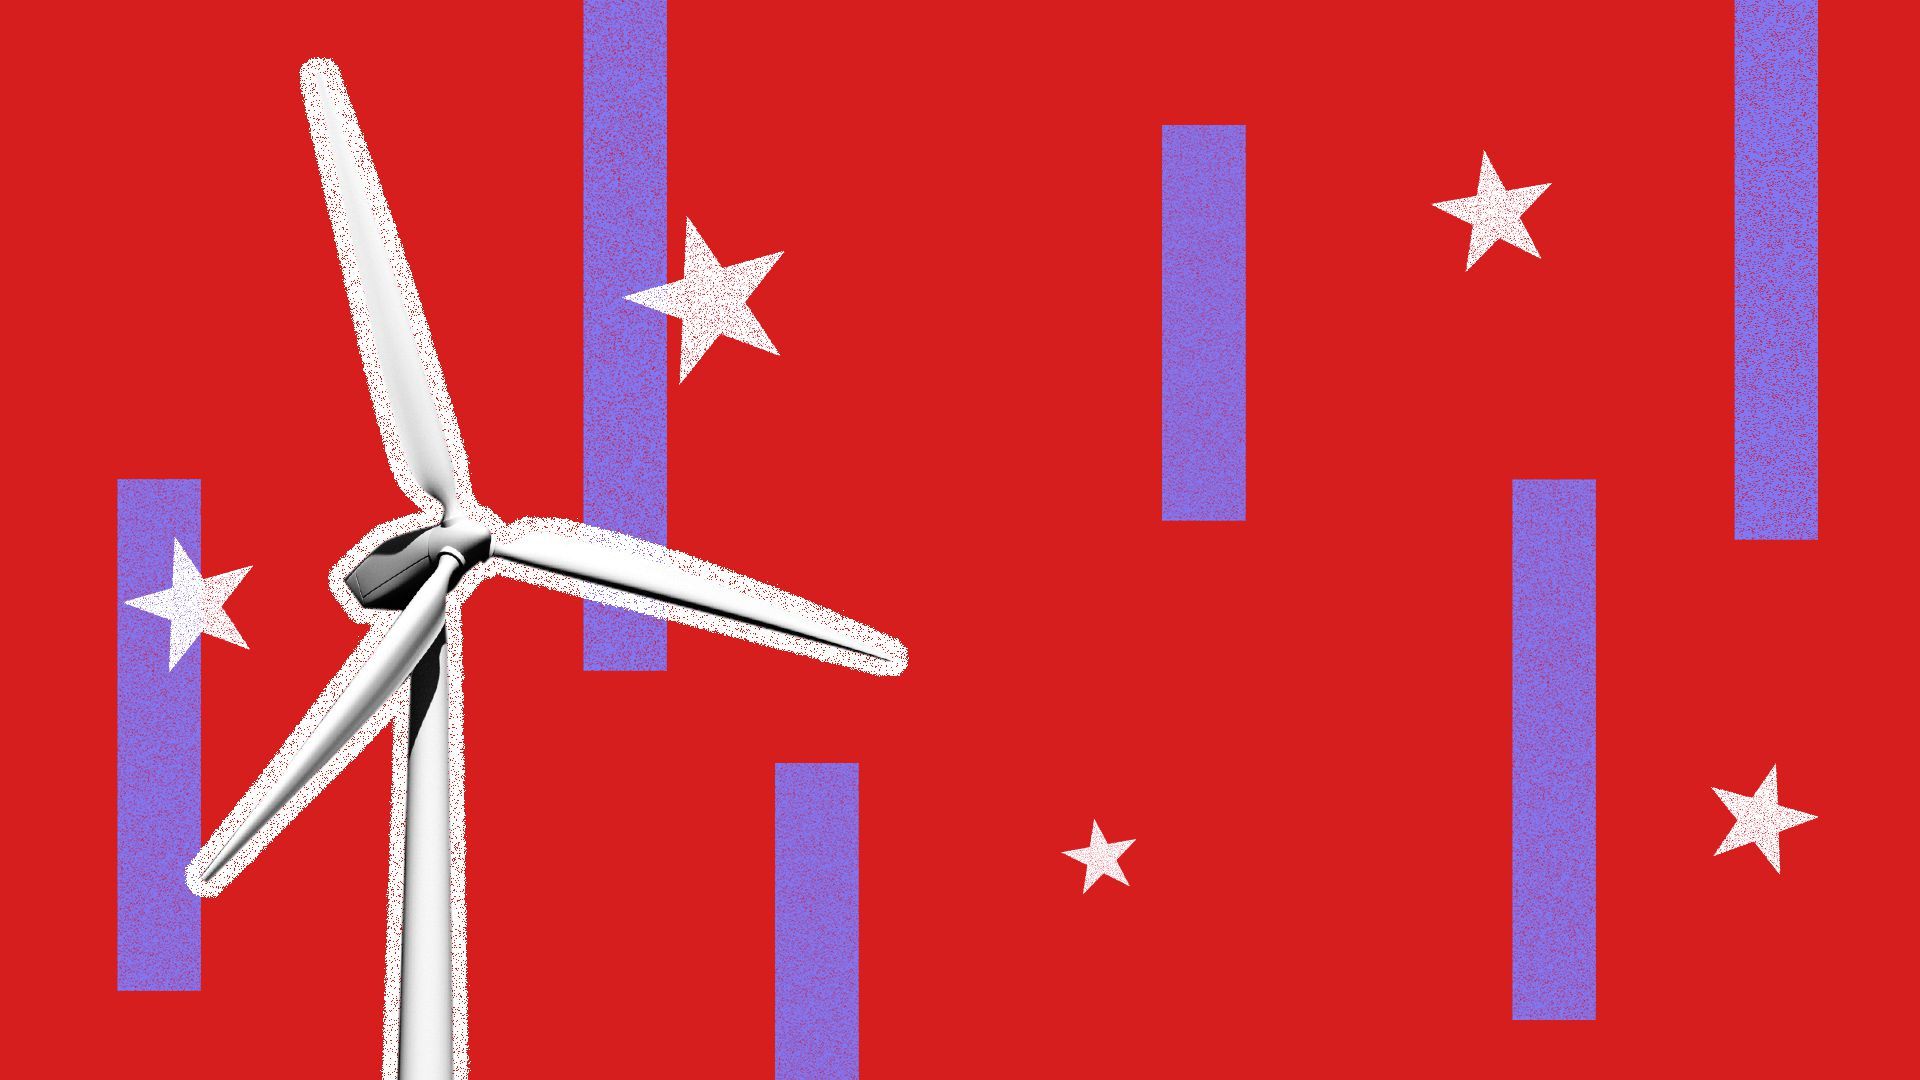 Illustration of a wind turbine with stars and stripes. 